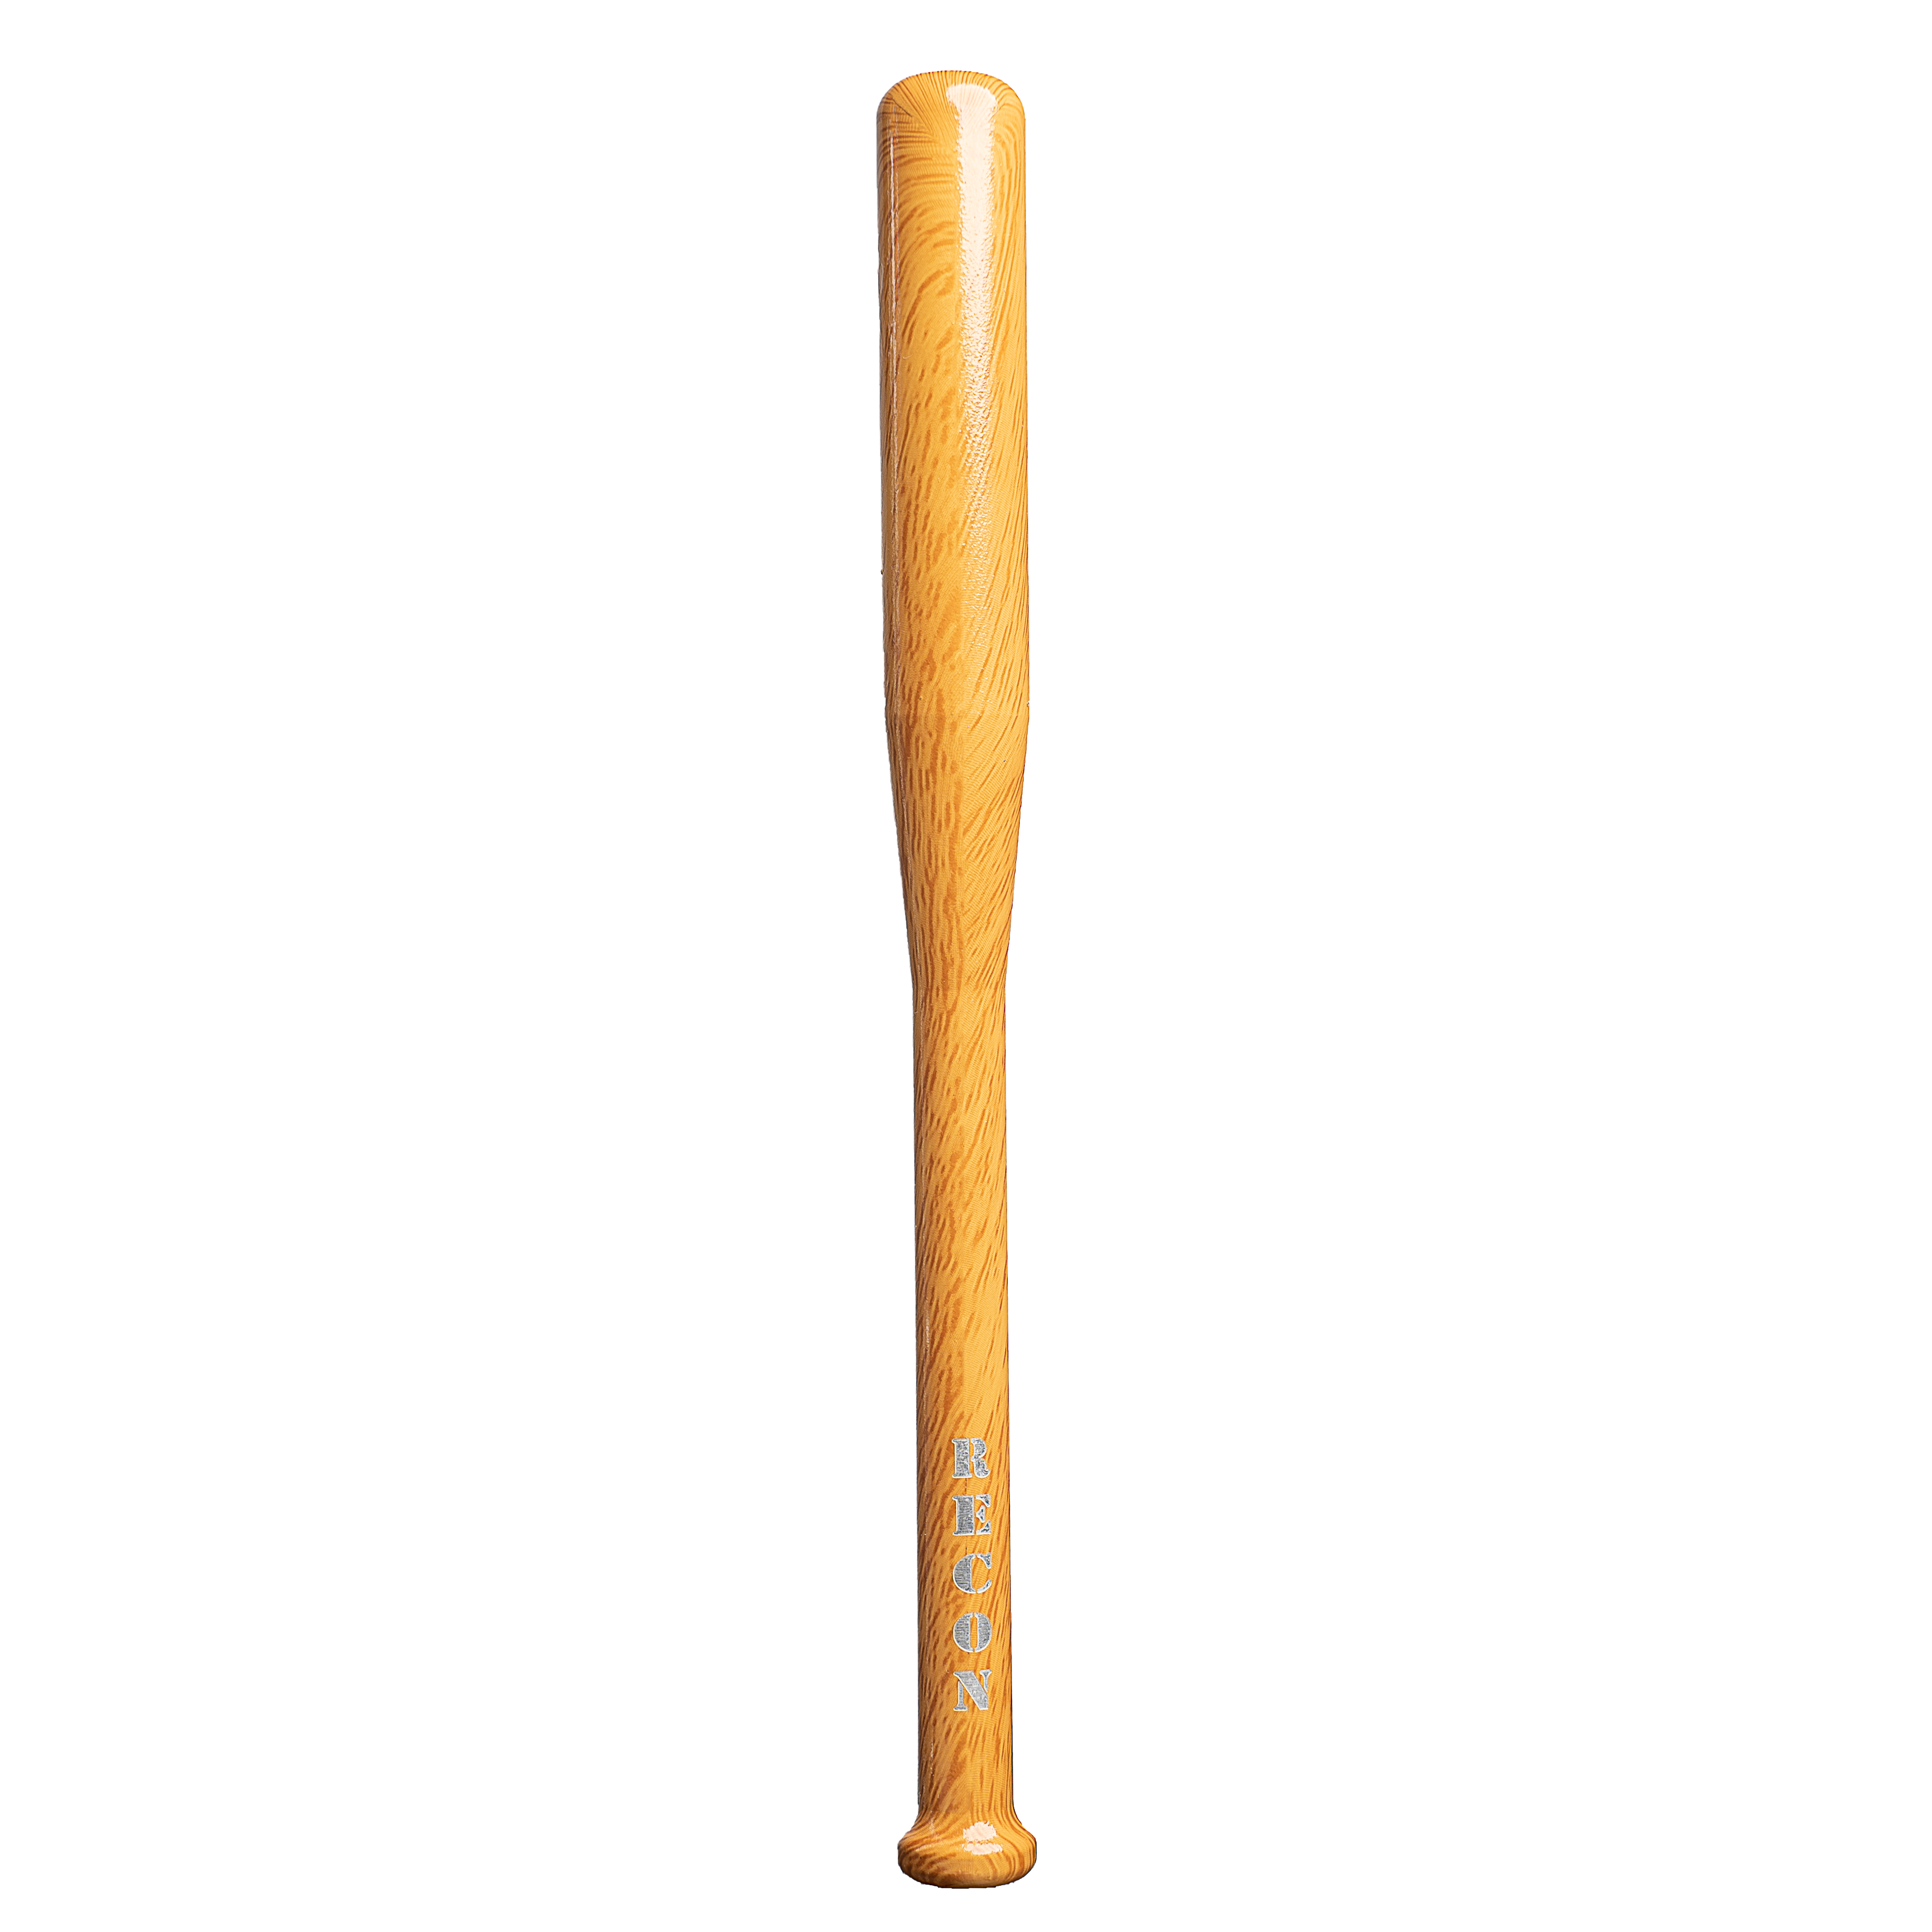 Baseball And Bat Pictures